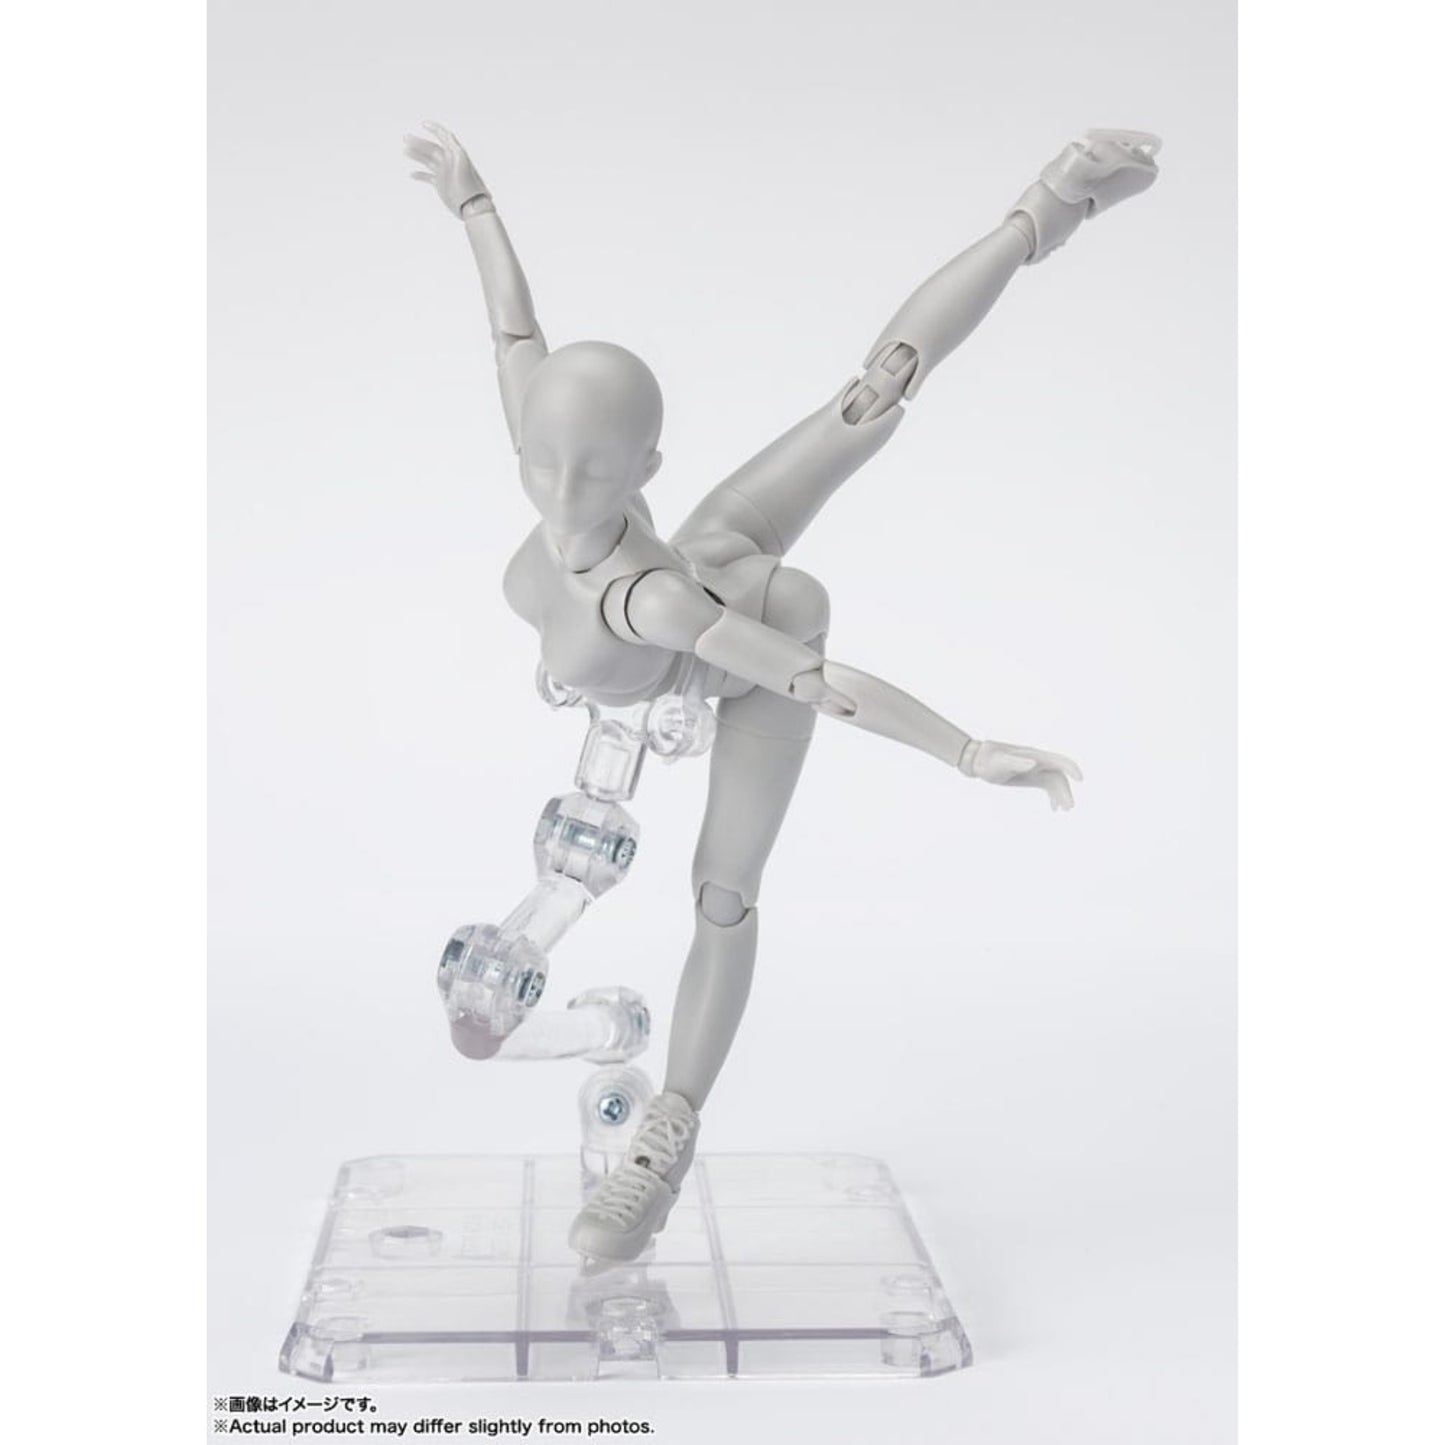 S.H.F. Actionfigur Body-Chan: Sports Edition DX Set (Gray Color Ver.)